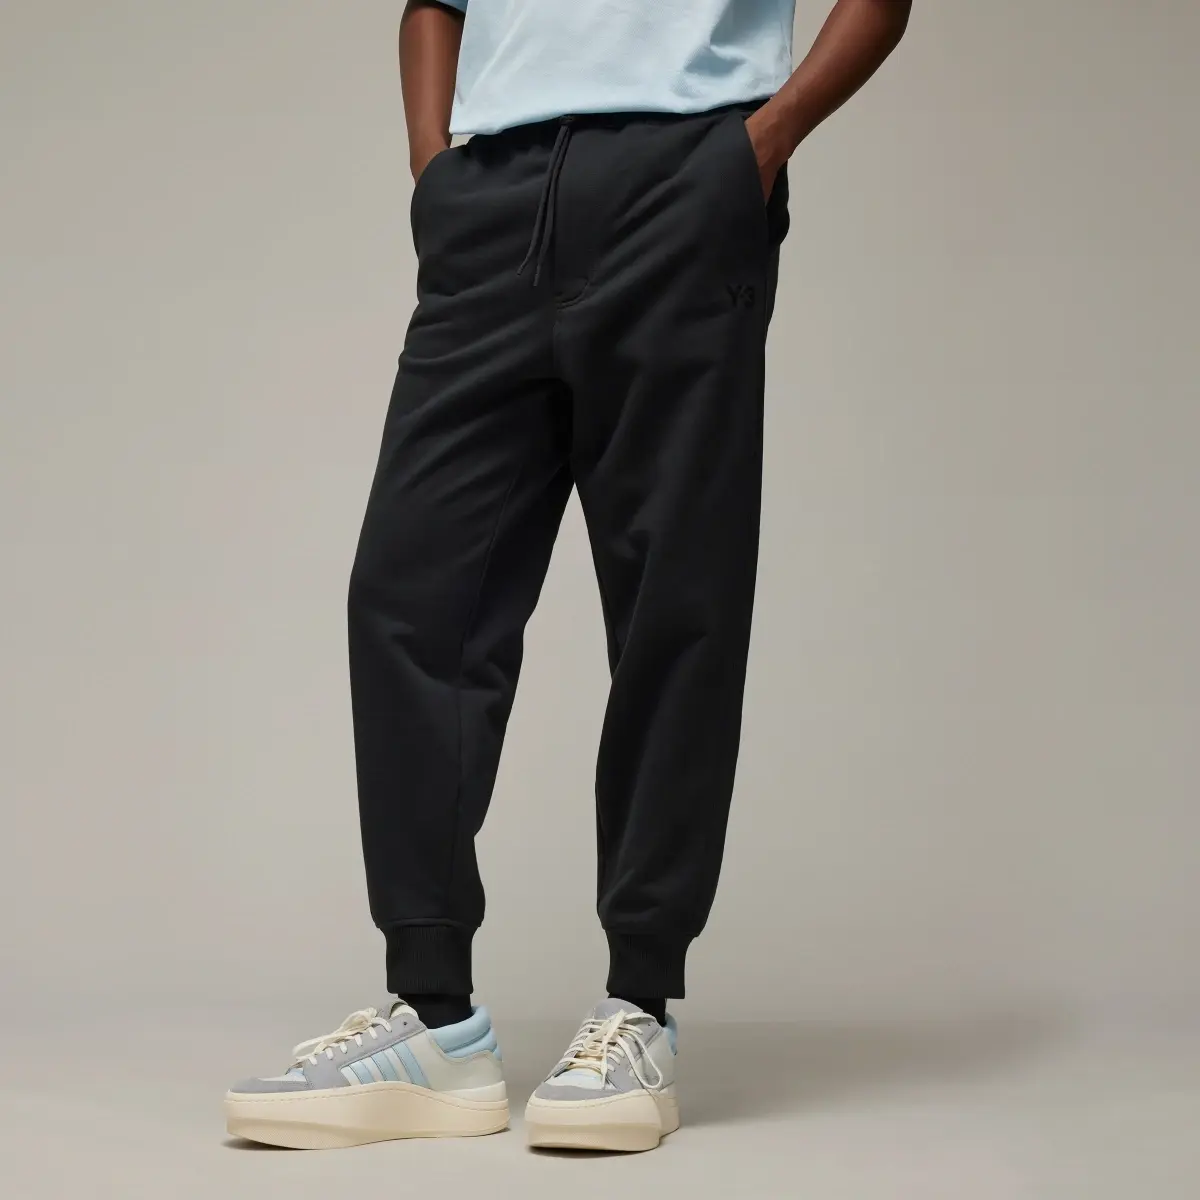 Adidas Y-3 French Terry Cuffed Pants. 1